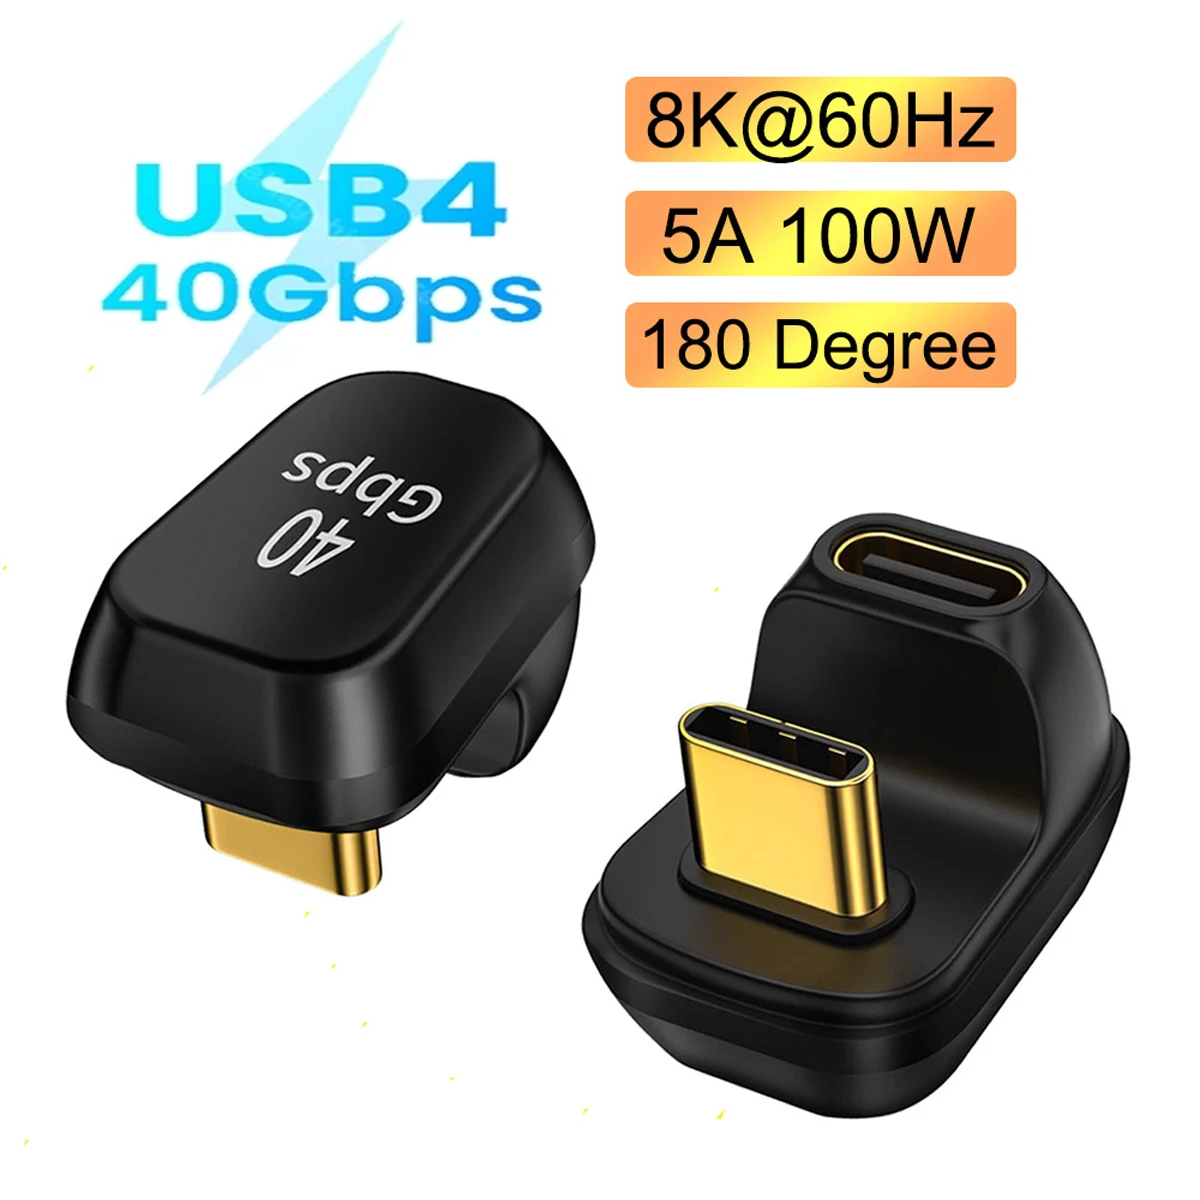 

Mini USB4.0 40Gbps Adapter USB C Male To Female 180° 100W Fast Charging Data Sync Converter 8K@60Hz for Laptop Tablet SmartPhone